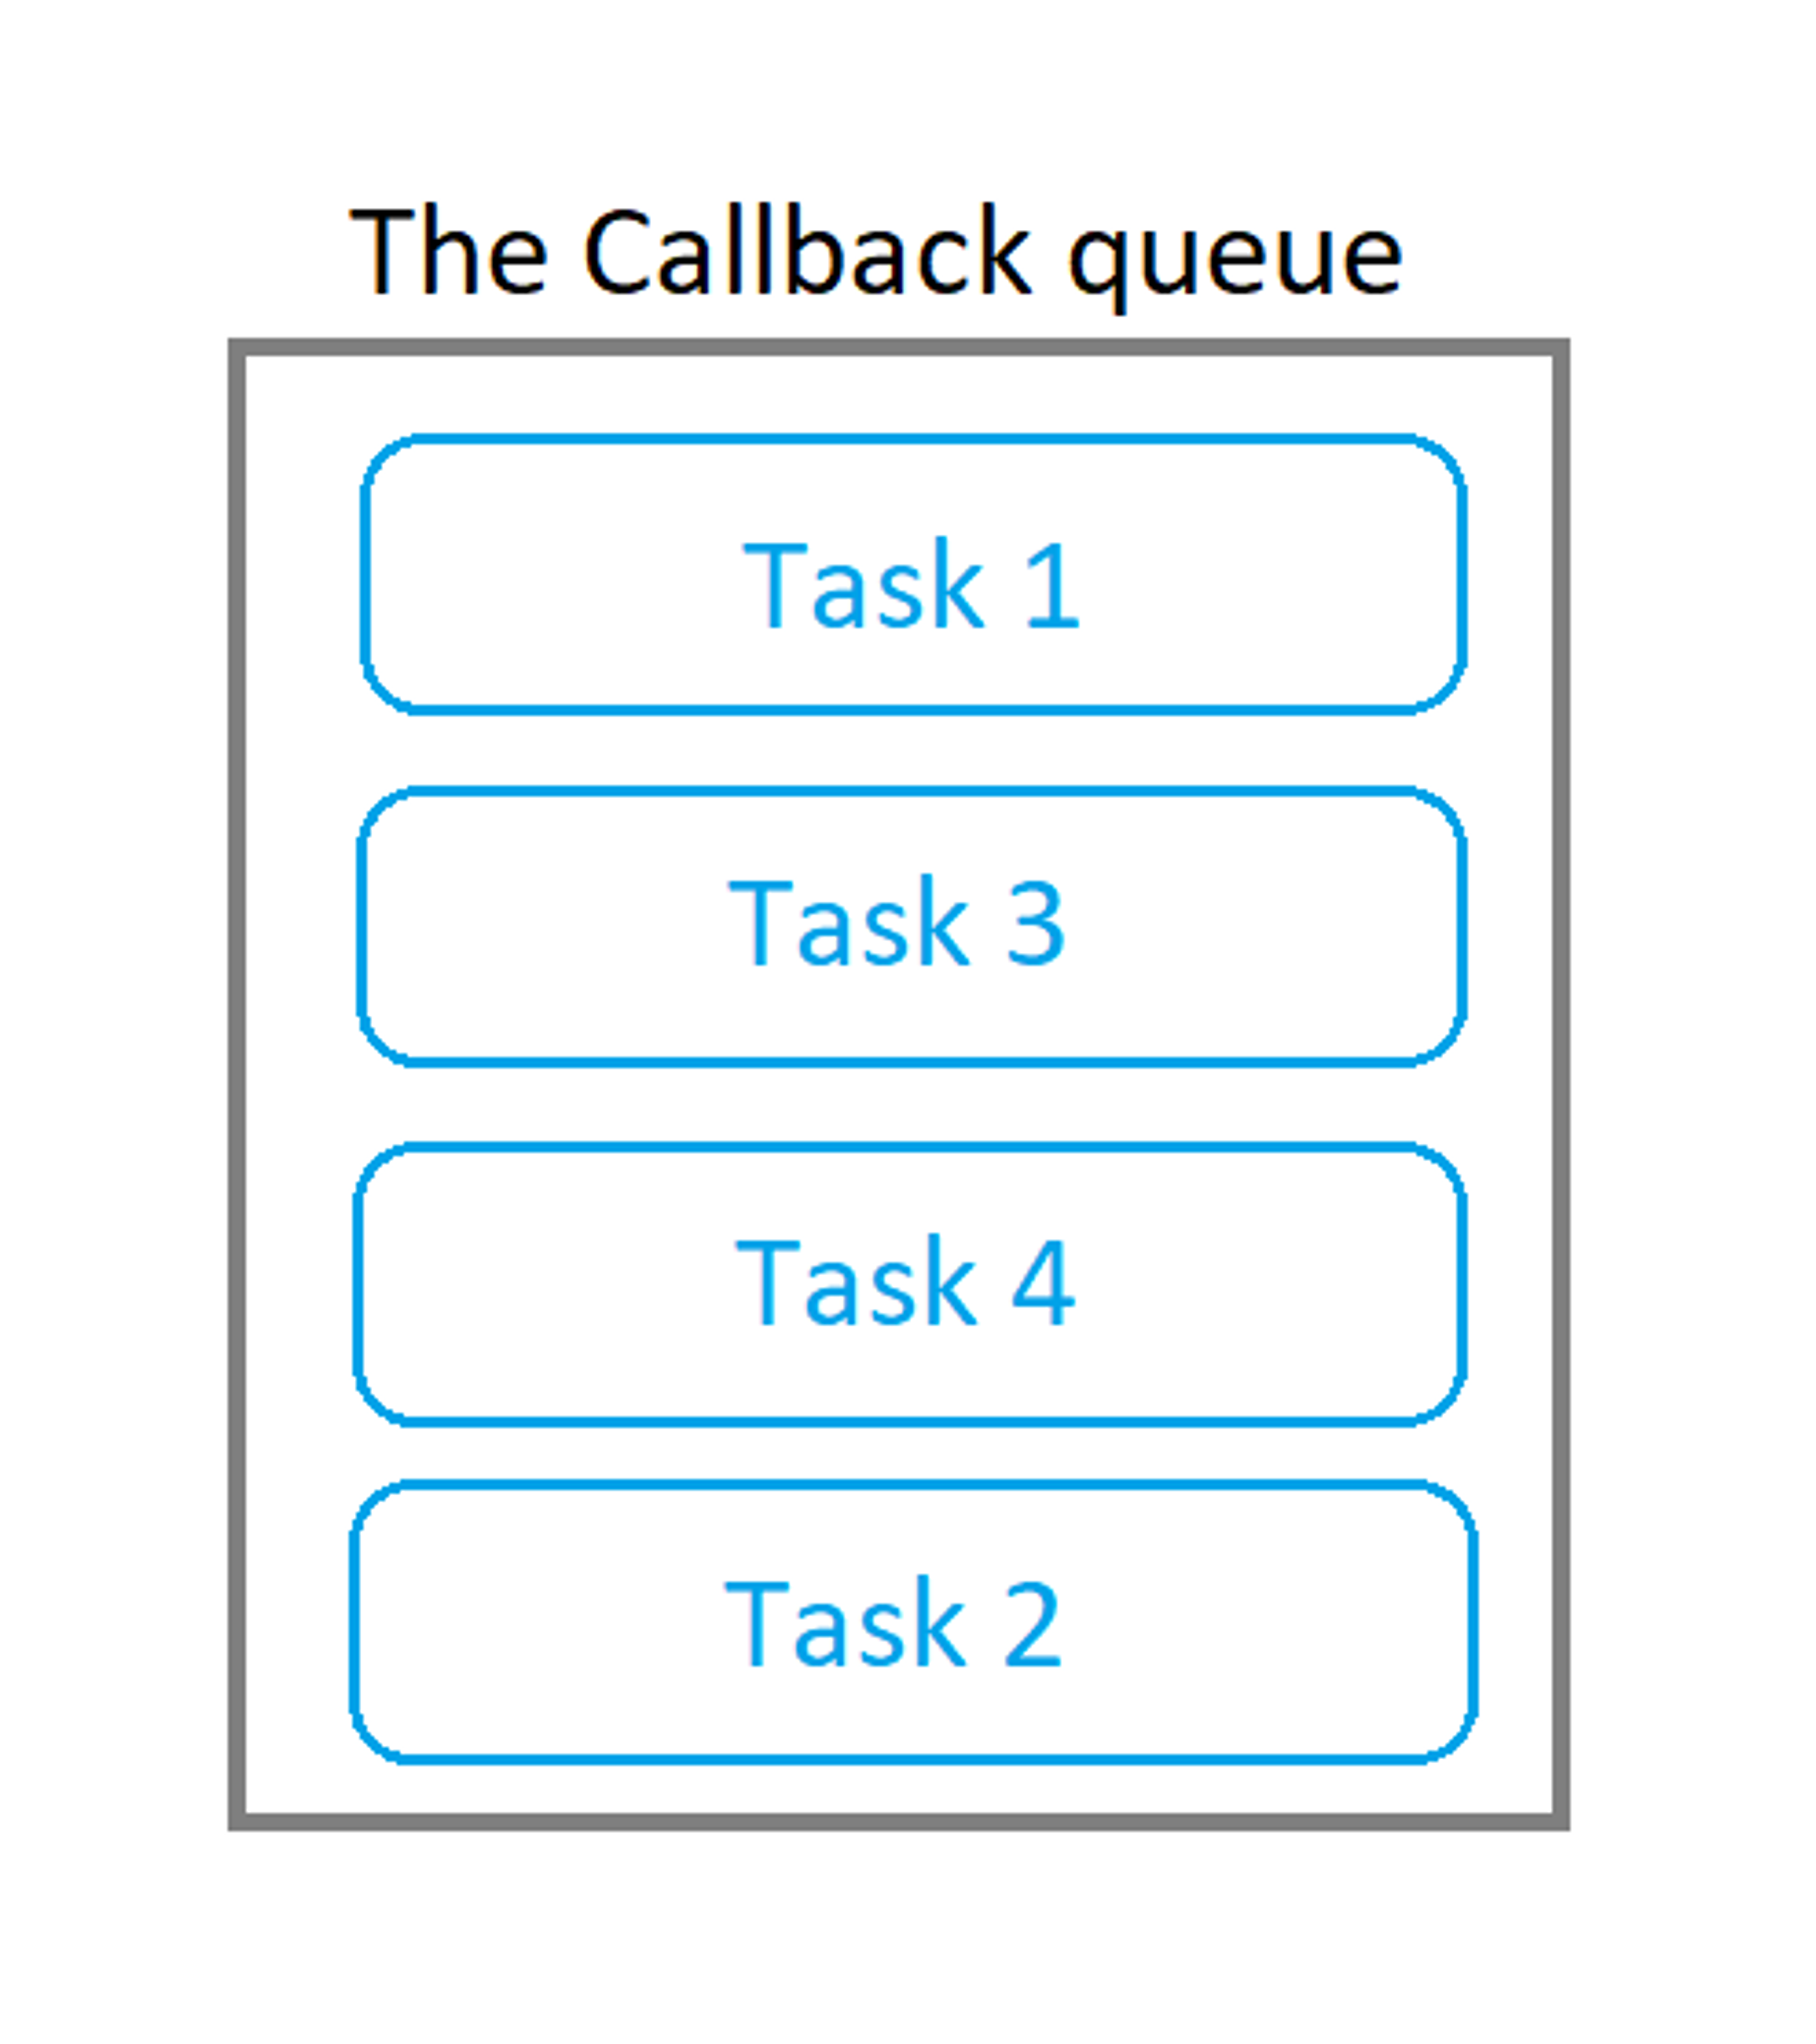 Callback queue state at this point